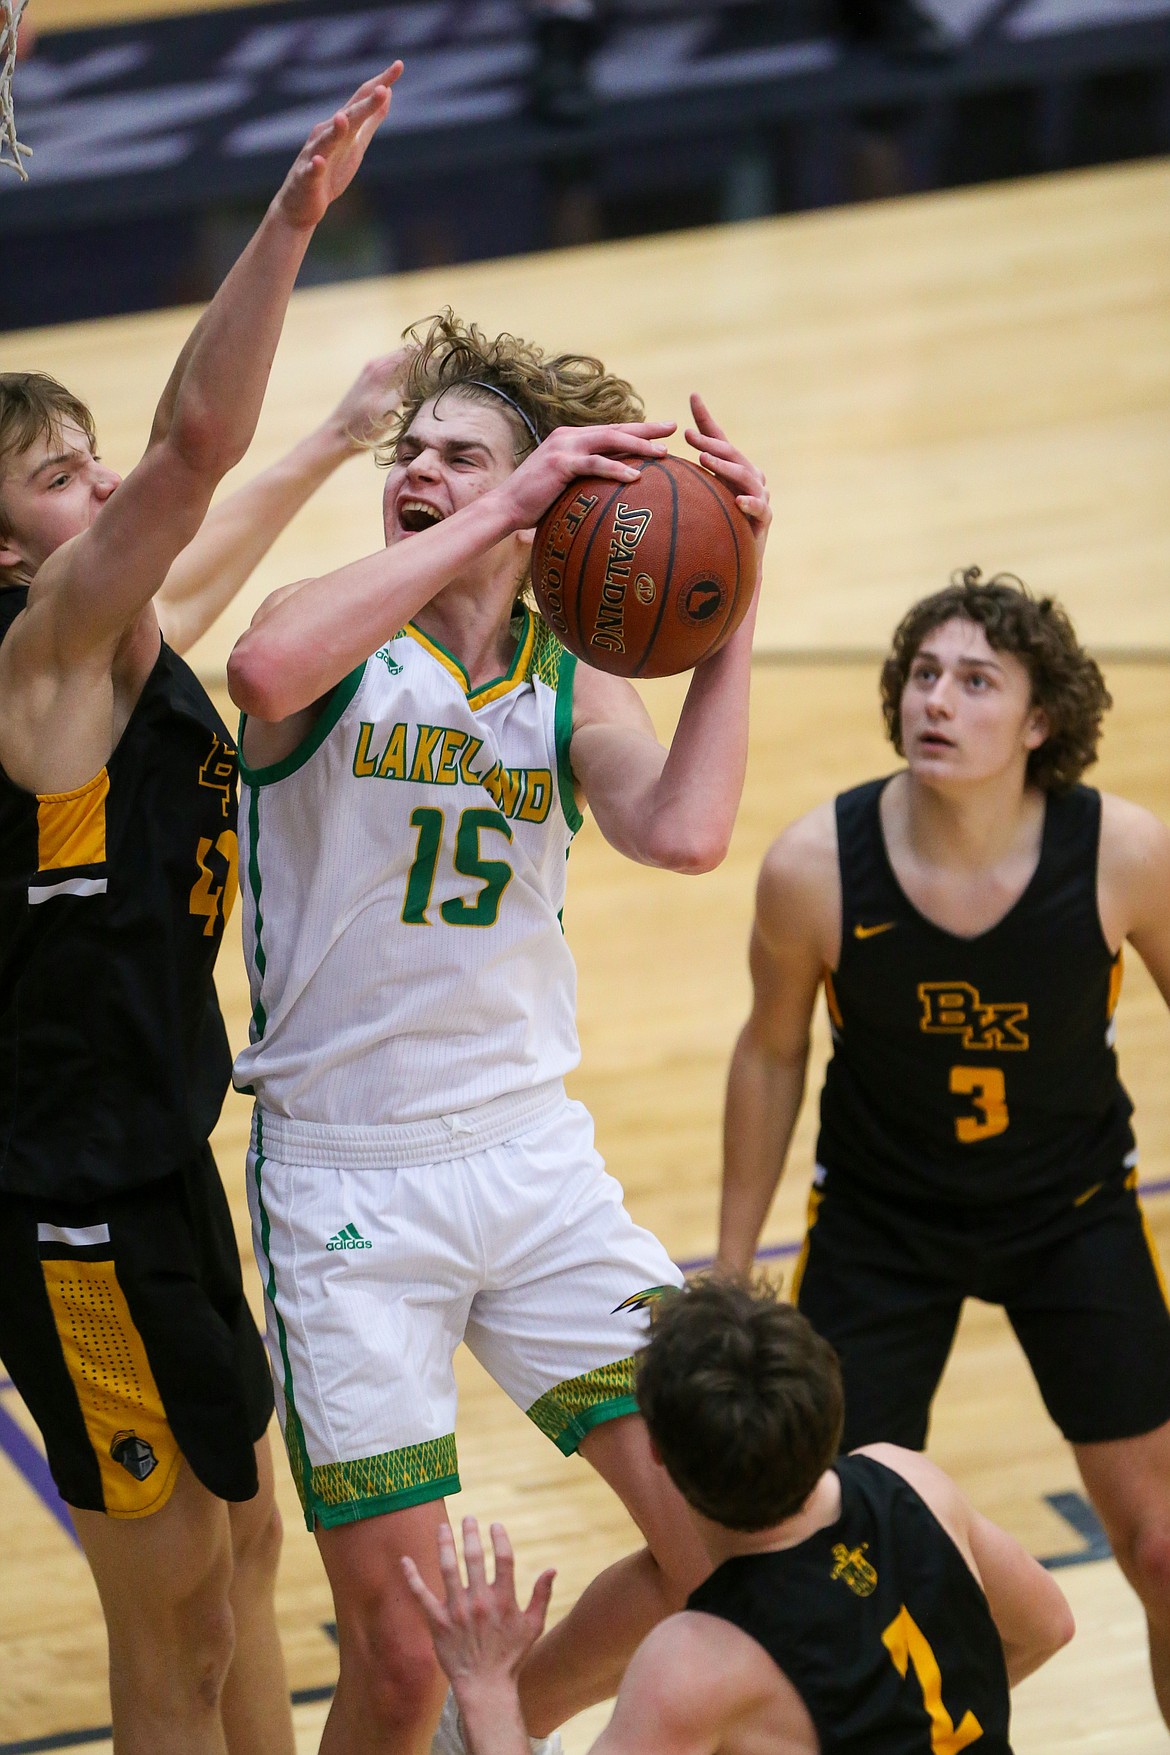 JASON DUCHOW PHOTOGRAPHY
Noah Haaland (15) of Lakeland goes up for a shot as Blake Hawthorne, left of Bishop Kelly defends and Keegan Croteau (3) looks on Thursday in a first-round game at the state 4A boys basketball tournament at Rocky Mountain High in Meridian.